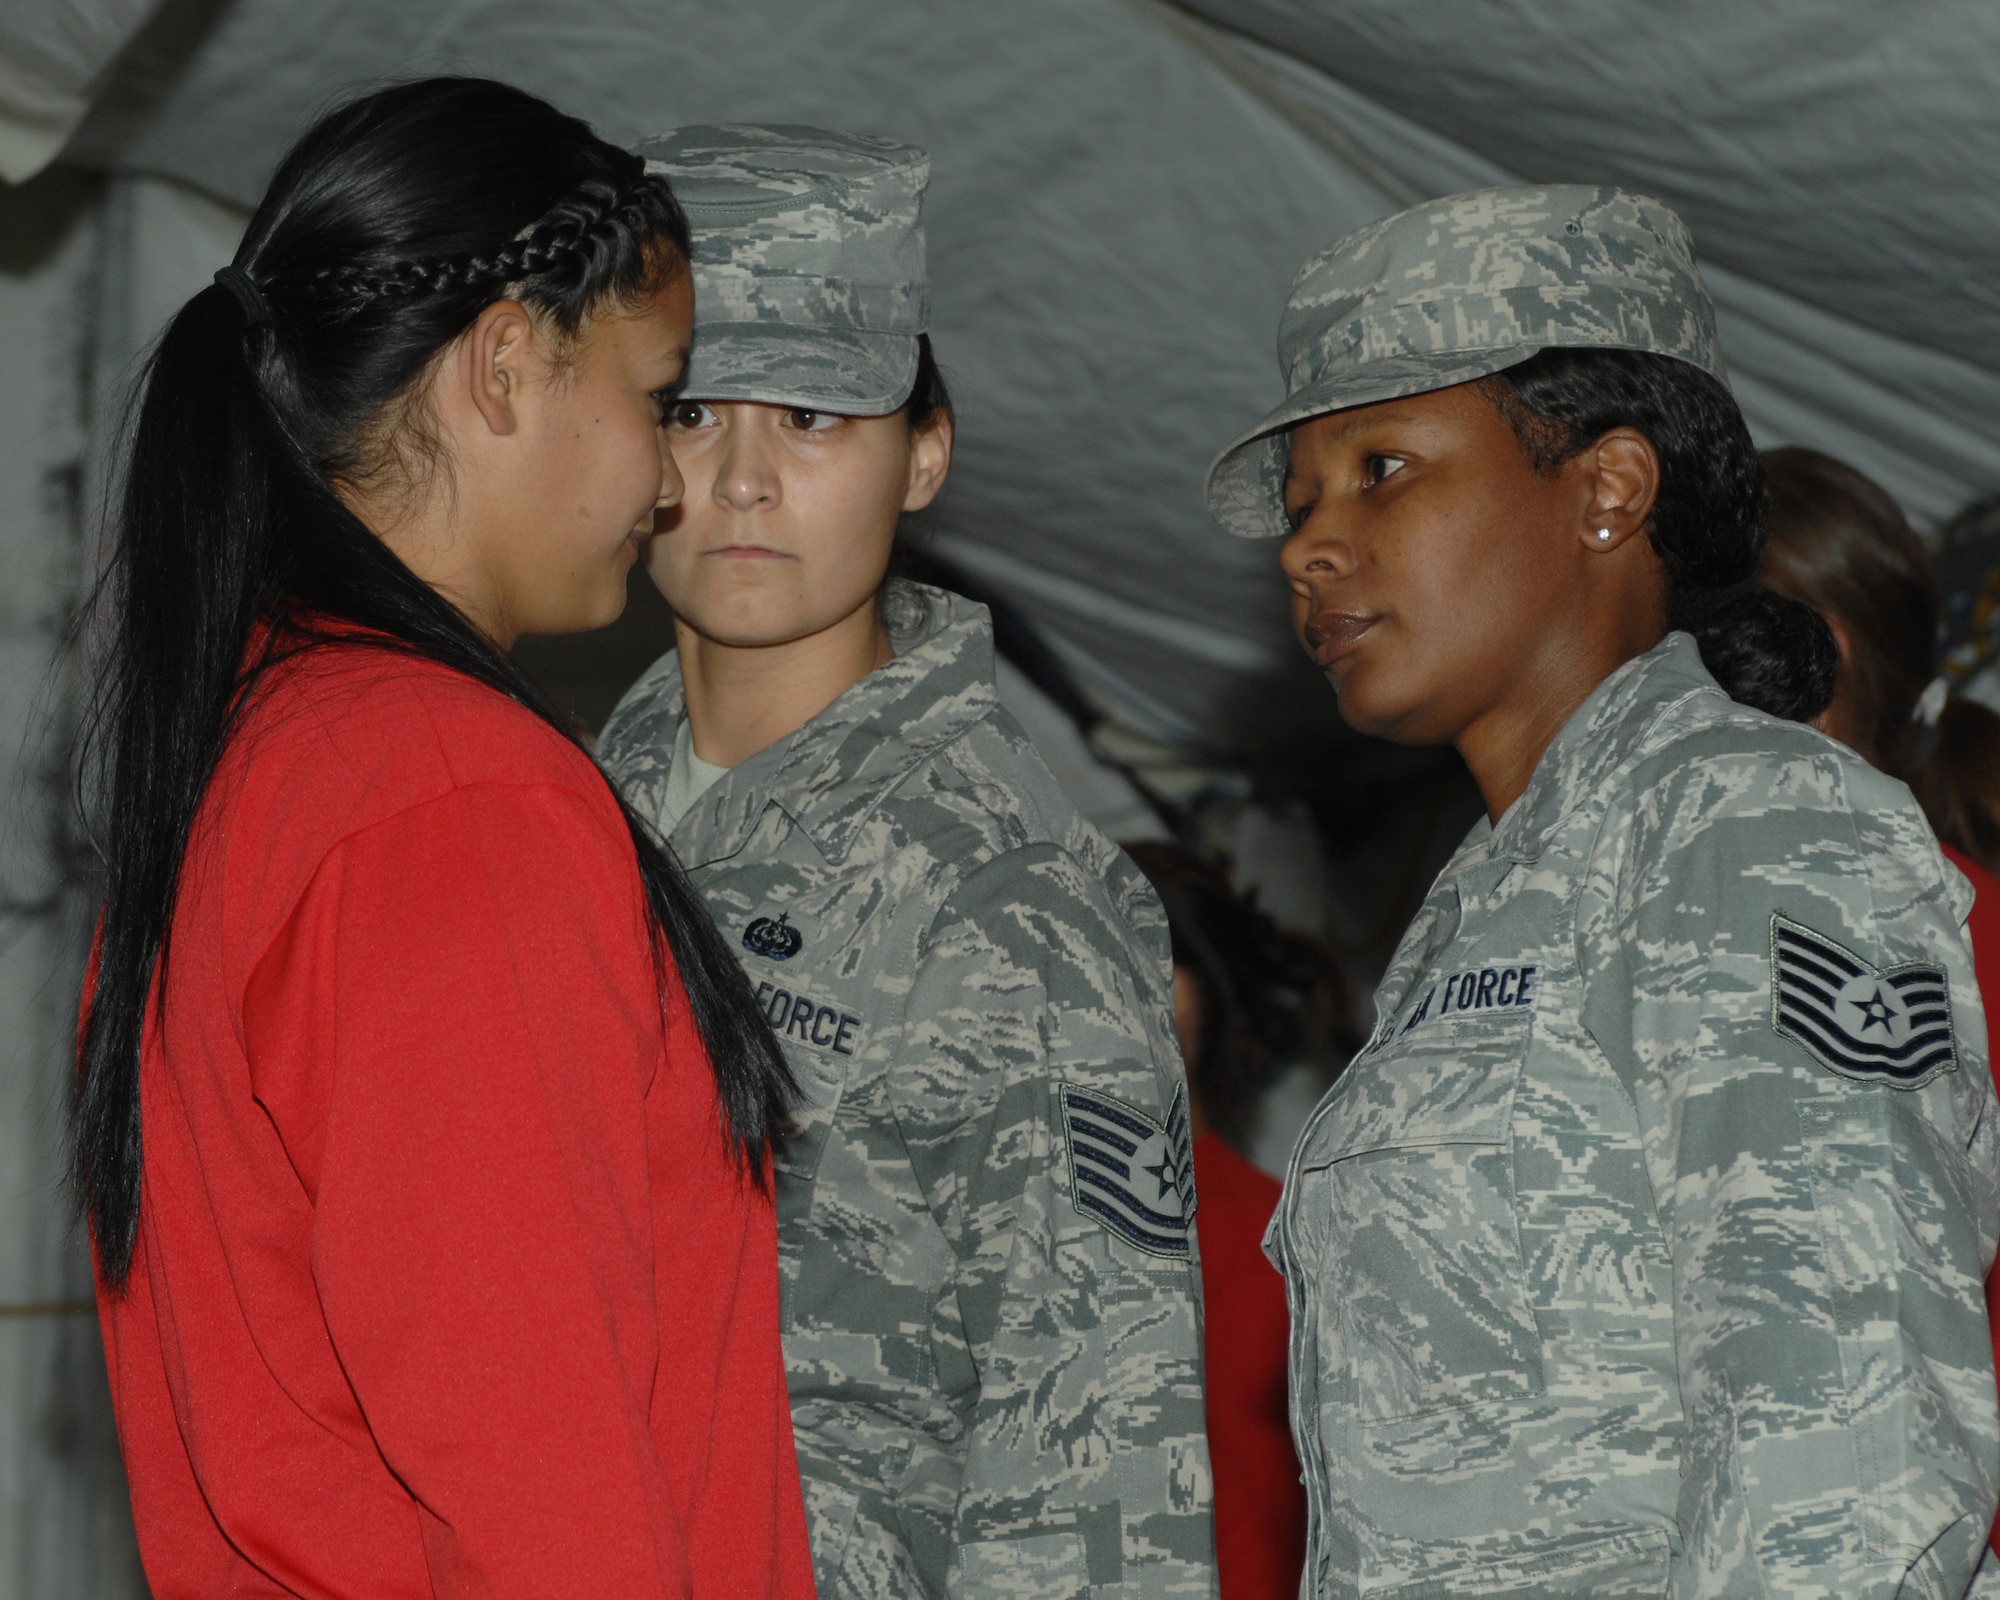 University of Arizona student Brigette Del Ponte, women’s softball team infielder, stands at attention as she is corrected by U.S. Air Force Tech. Sgt. Tibetha Pascal (right) and Tech. Sgt. Carrie Nunez (left), both former military training instructors, on Davis-Monthan Air Force Base, Ariz., Jan. 13, 2012. Del Ponte was caught smiling and was then taught her stay at D-M was a serious one. (U.S. Air Force photo by Airman 1st Class Josh Slavin/Released)